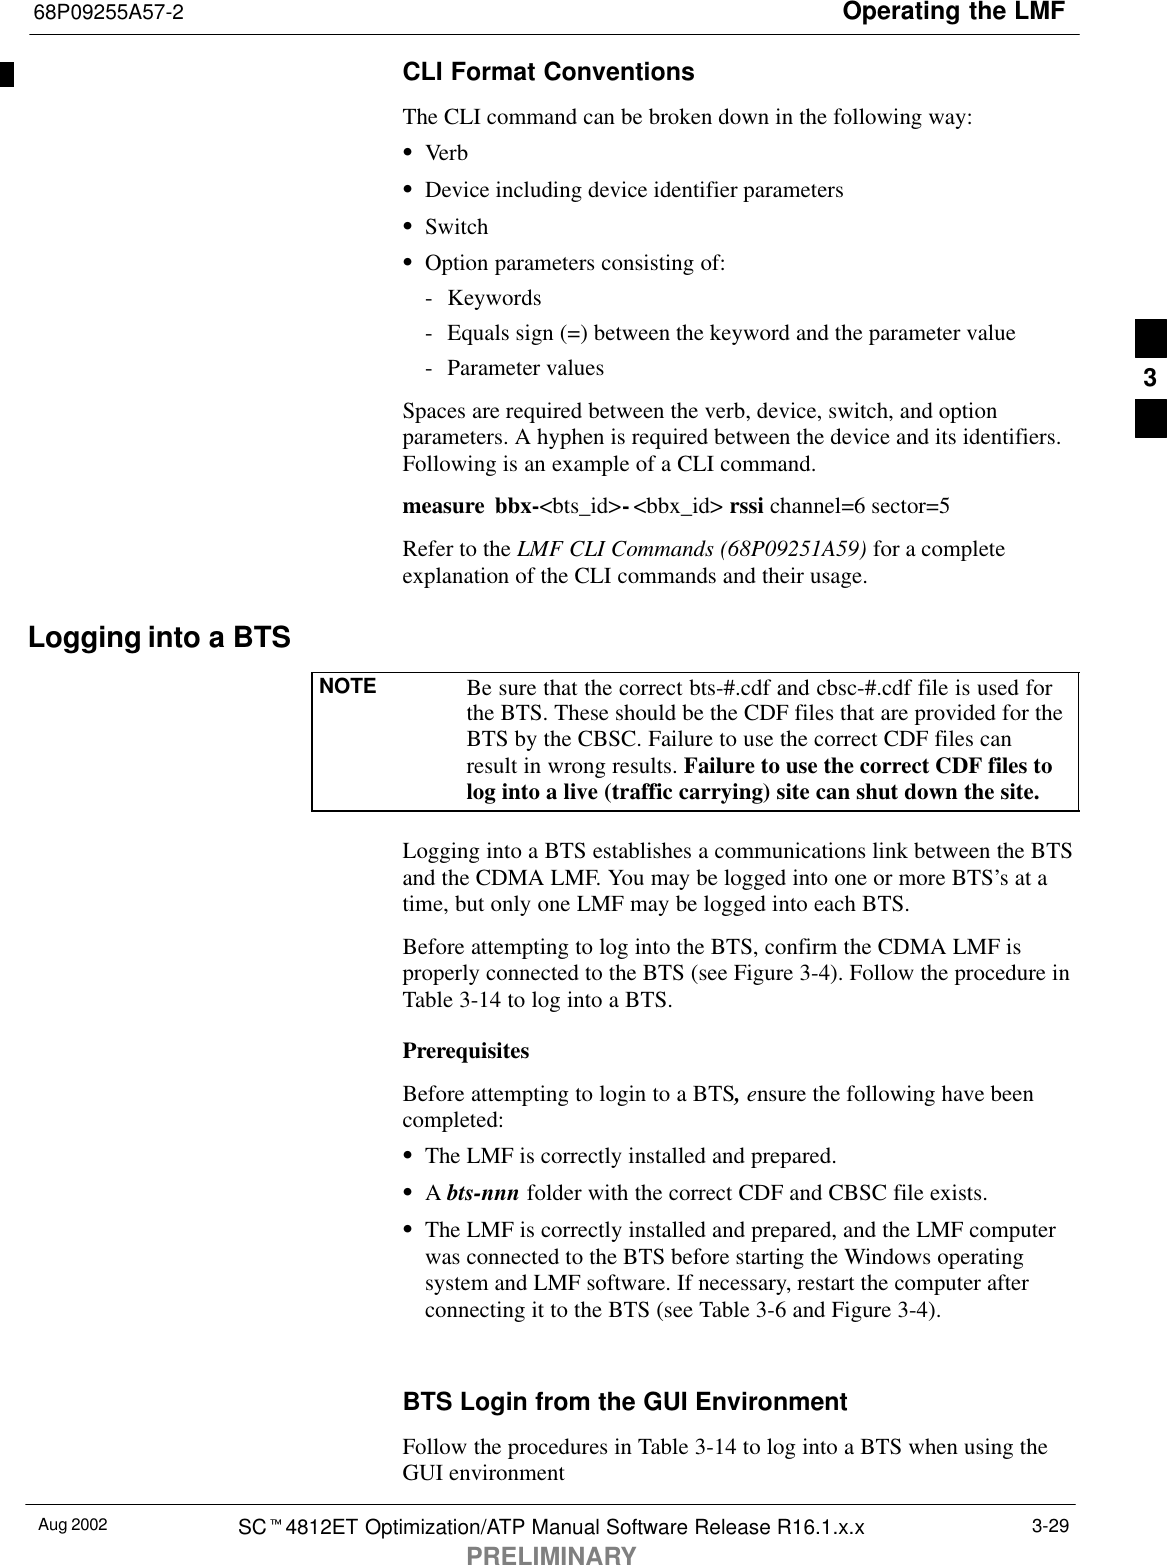 Operating the LMF68P09255A57-2Aug 2002 SCt4812ET Optimization/ATP Manual Software Release R16.1.x.xPRELIMINARY3-29CLI Format ConventionsThe CLI command can be broken down in the following way:SVerbSDevice including device identifier parametersSSwitchSOption parameters consisting of:- Keywords- Equals sign (=) between the keyword and the parameter value- Parameter valuesSpaces are required between the verb, device, switch, and optionparameters. A hyphen is required between the device and its identifiers.Following is an example of a CLI command.measure bbx-&lt;bts_id&gt;-&lt;bbx_id&gt; rssi channel=6 sector=5Refer to the LMF CLI Commands (68P09251A59) for a completeexplanation of the CLI commands and their usage.Logging into a BTSNOTE Be sure that the correct bts-#.cdf and cbsc-#.cdf file is used forthe BTS. These should be the CDF files that are provided for theBTS by the CBSC. Failure to use the correct CDF files canresult in wrong results. Failure to use the correct CDF files tolog into a live (traffic carrying) site can shut down the site.Logging into a BTS establishes a communications link between the BTSand the CDMA LMF. You may be logged into one or more BTS’s at atime, but only one LMF may be logged into each BTS.Before attempting to log into the BTS, confirm the CDMA LMF isproperly connected to the BTS (see Figure 3-4). Follow the procedure inTable 3-14 to log into a BTS.PrerequisitesBefore attempting to login to a BTS, ensure the following have beencompleted:SThe LMF is correctly installed and prepared.SA bts-nnn folder with the correct CDF and CBSC file exists.SThe LMF is correctly installed and prepared, and the LMF computerwas connected to the BTS before starting the Windows operatingsystem and LMF software. If necessary, restart the computer afterconnecting it to the BTS (see Table 3-6 and Figure 3-4).BTS Login from the GUI EnvironmentFollow the procedures in Table 3-14 to log into a BTS when using theGUI environment3